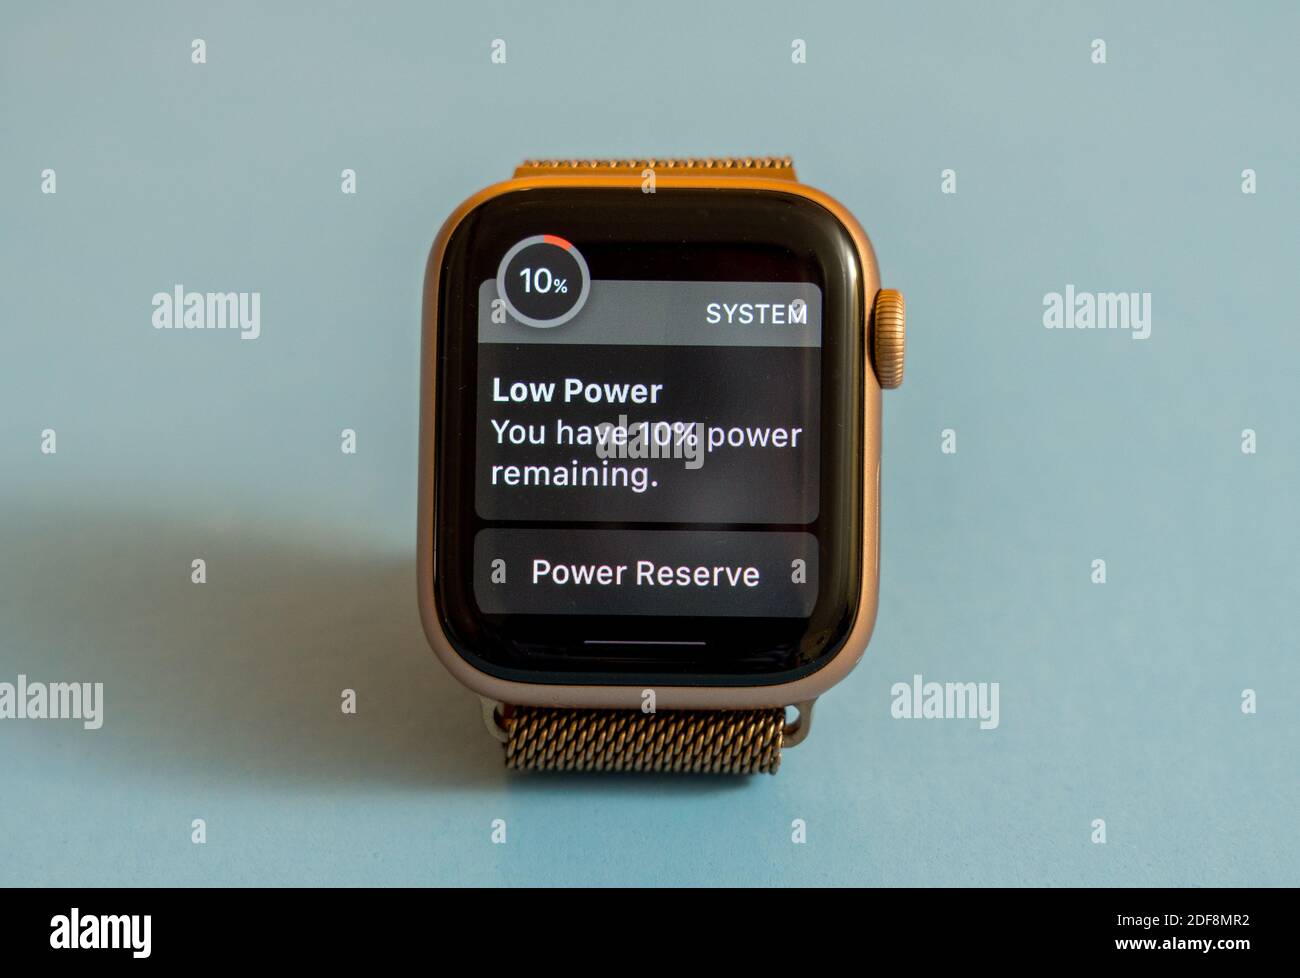 Morgantown, WV - 3 December 2020: Apple watch series six showing system alert about low power warning due to short battery life Stock Photo